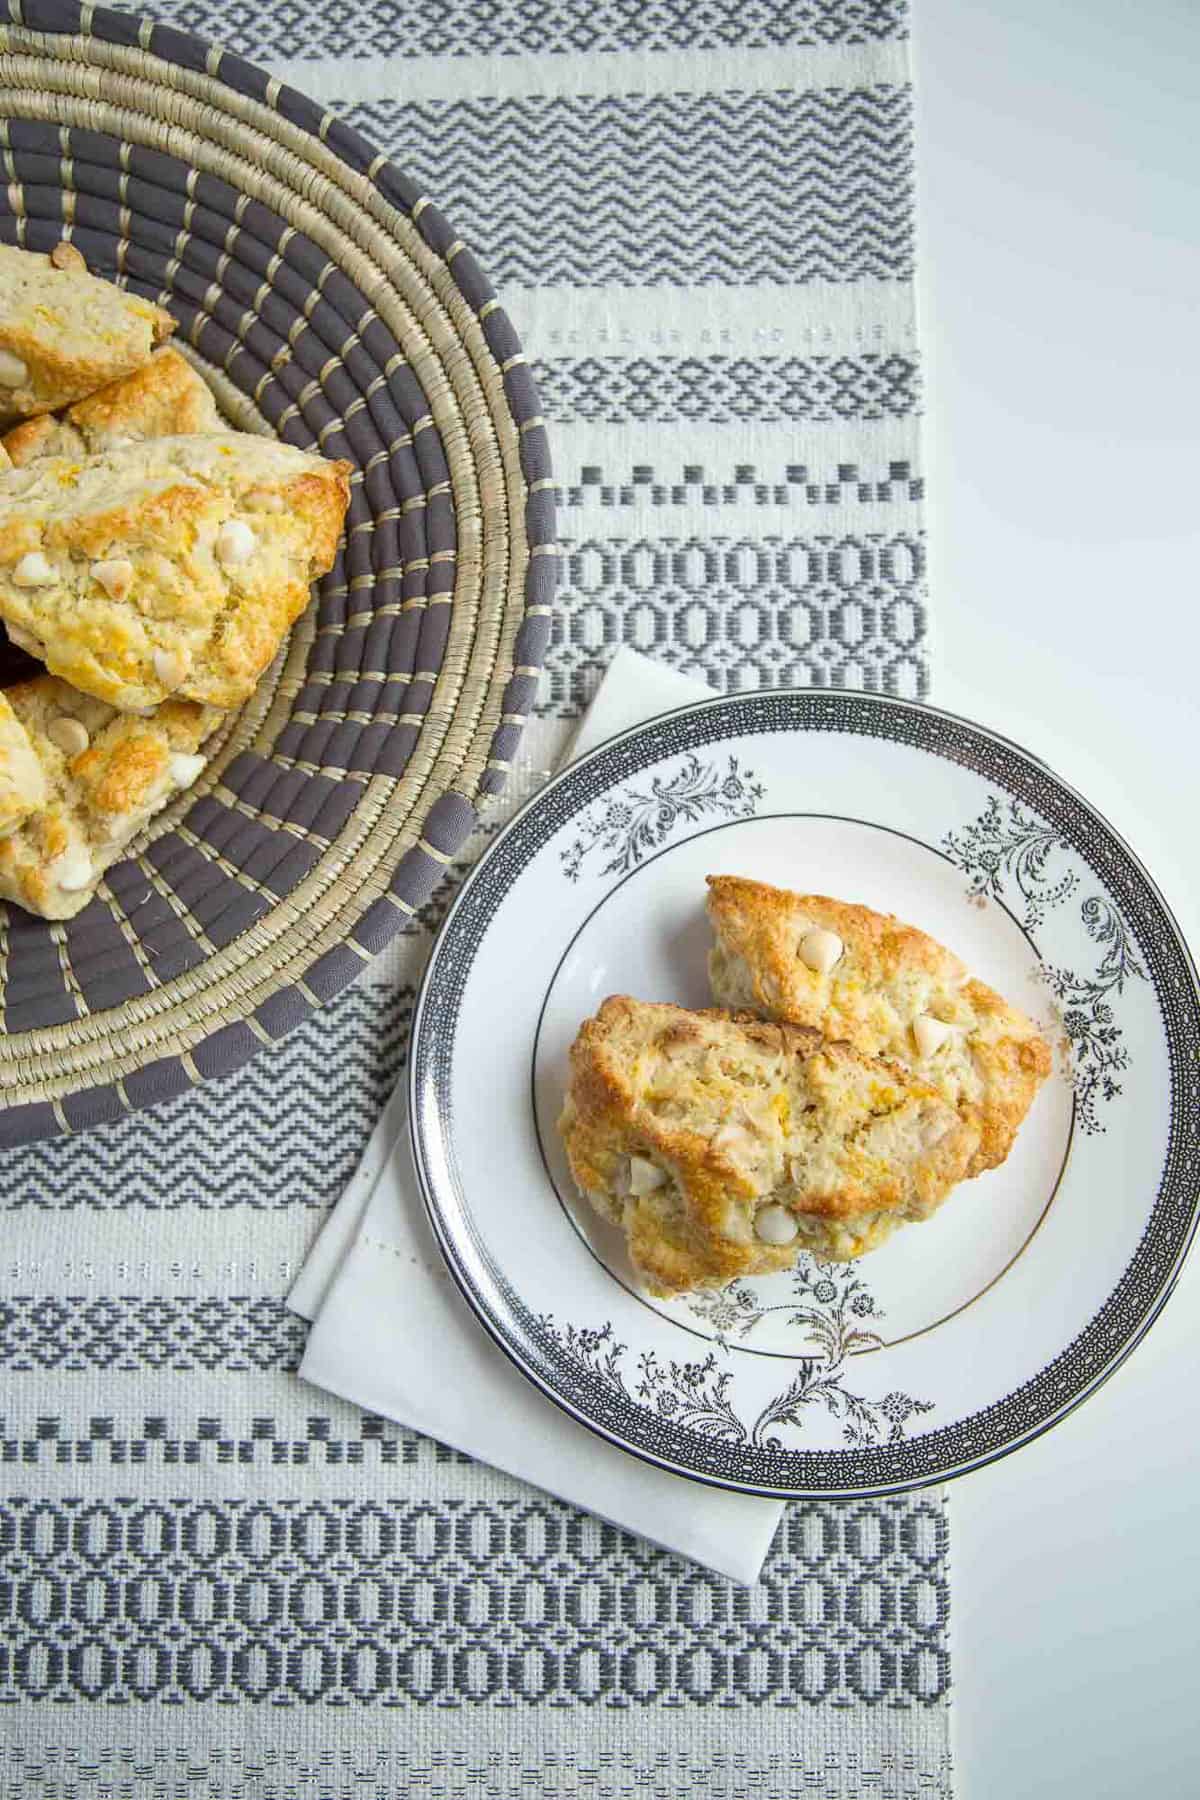 orange scones on a decorative gray plate and in a woven basket.